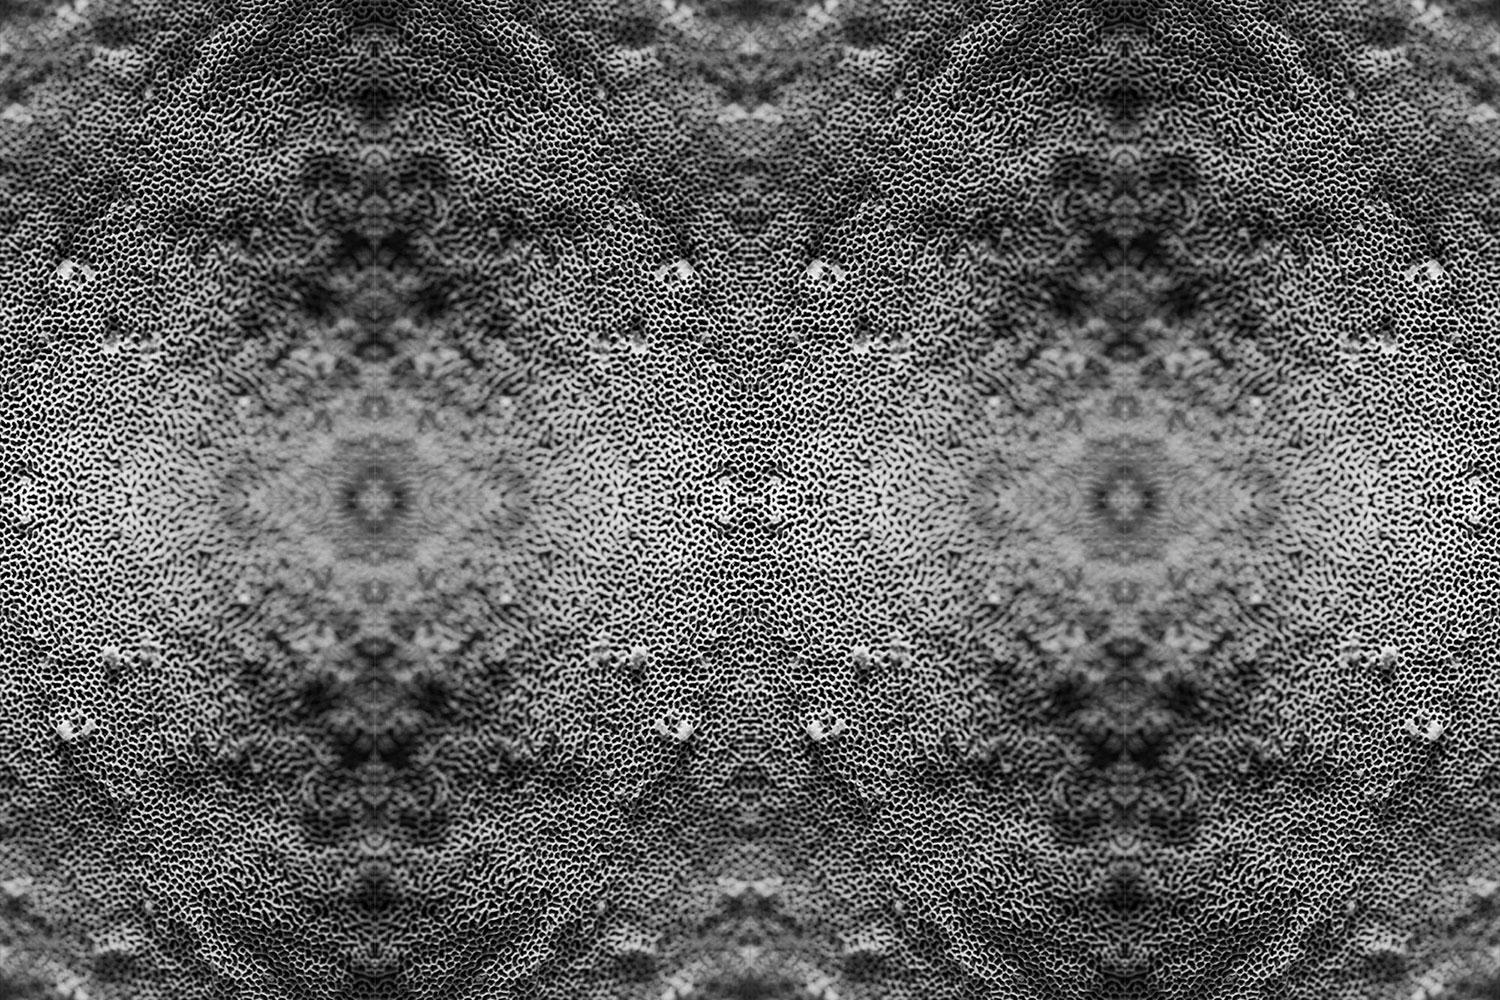 Textured pattern and shapes created by mirroring a single photo of a mushroom.